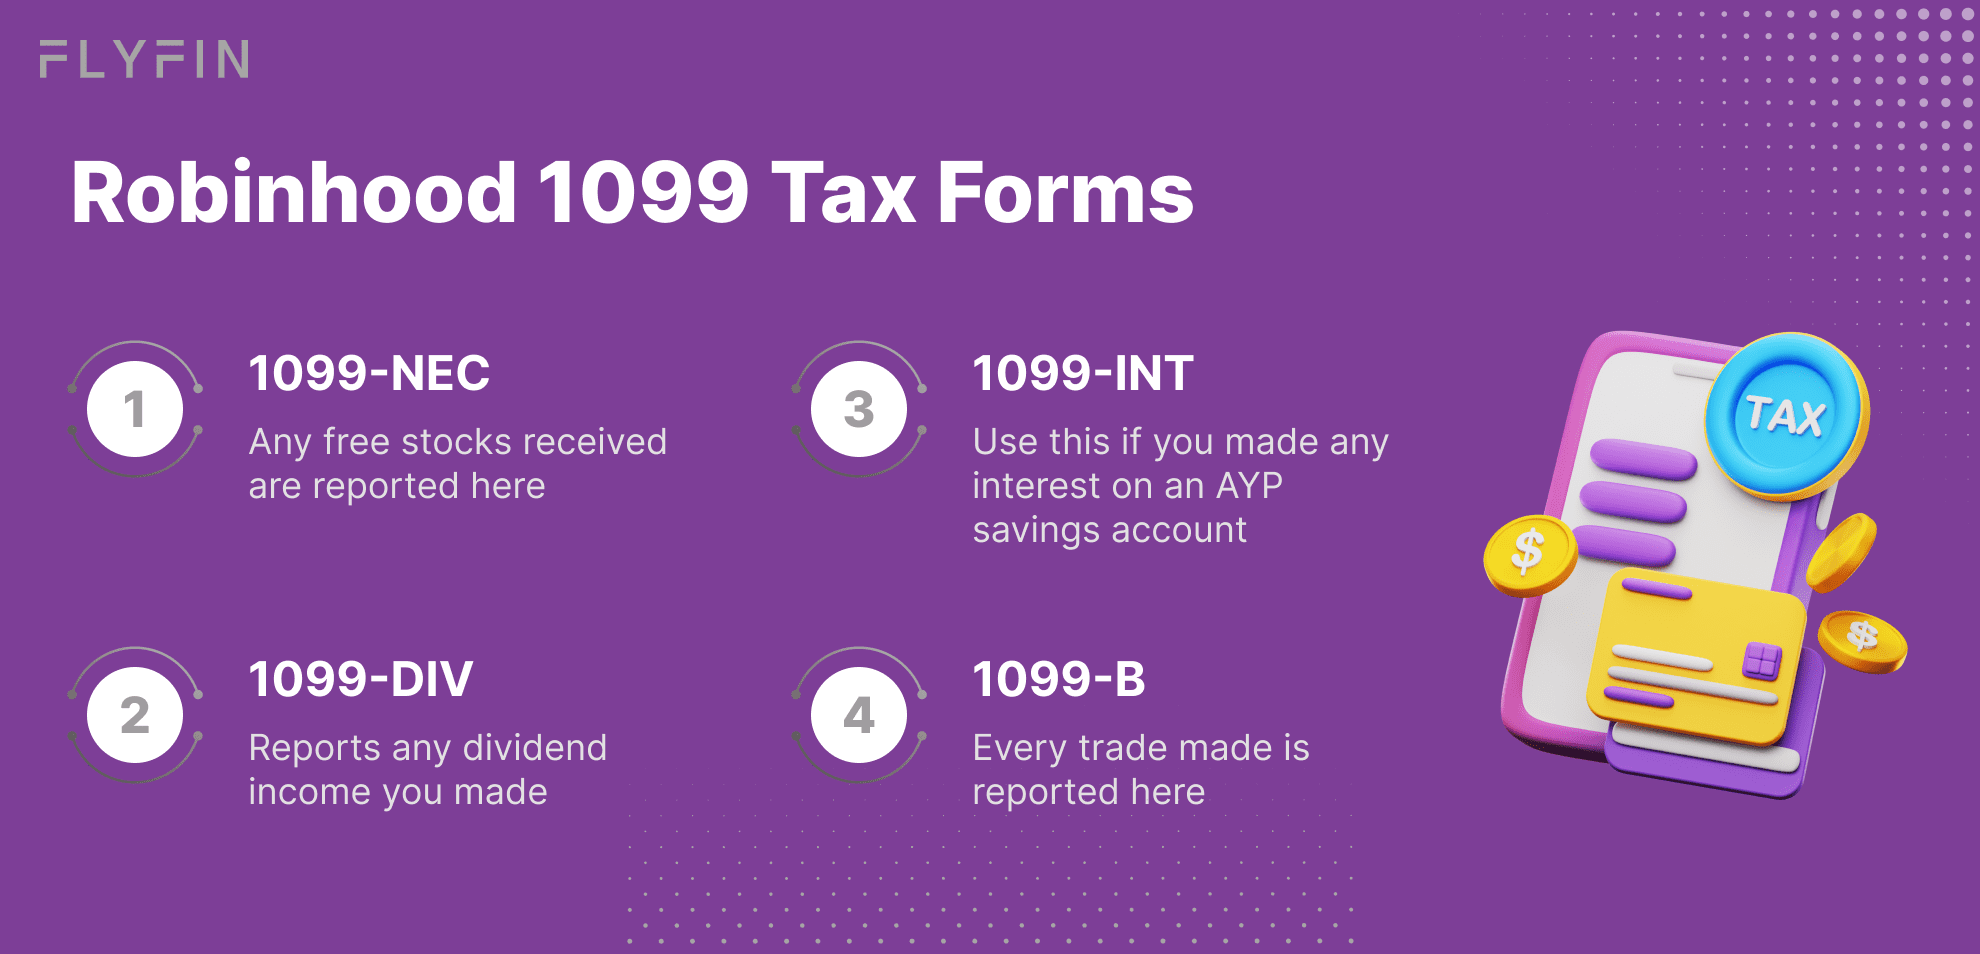 Robinhood tax forms for 1099-NEC, DIV, INT, and B. Includes reporting of free stocks, dividend income, interest, and trades for tax purposes.